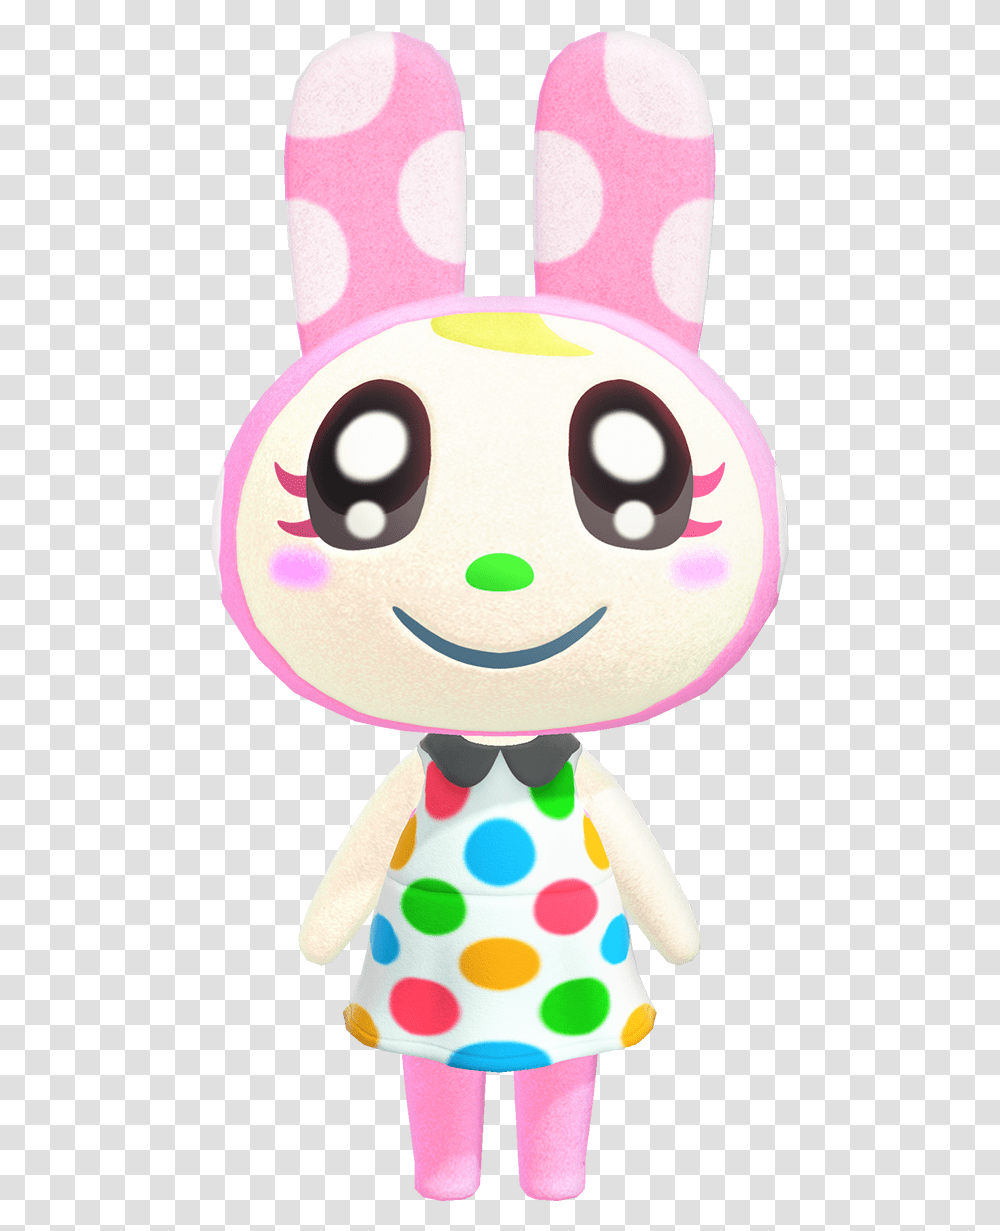 Chrissy Chrissy Animal Crossing New Horizons, Sweets, Food, Confectionery, Rattle Transparent Png